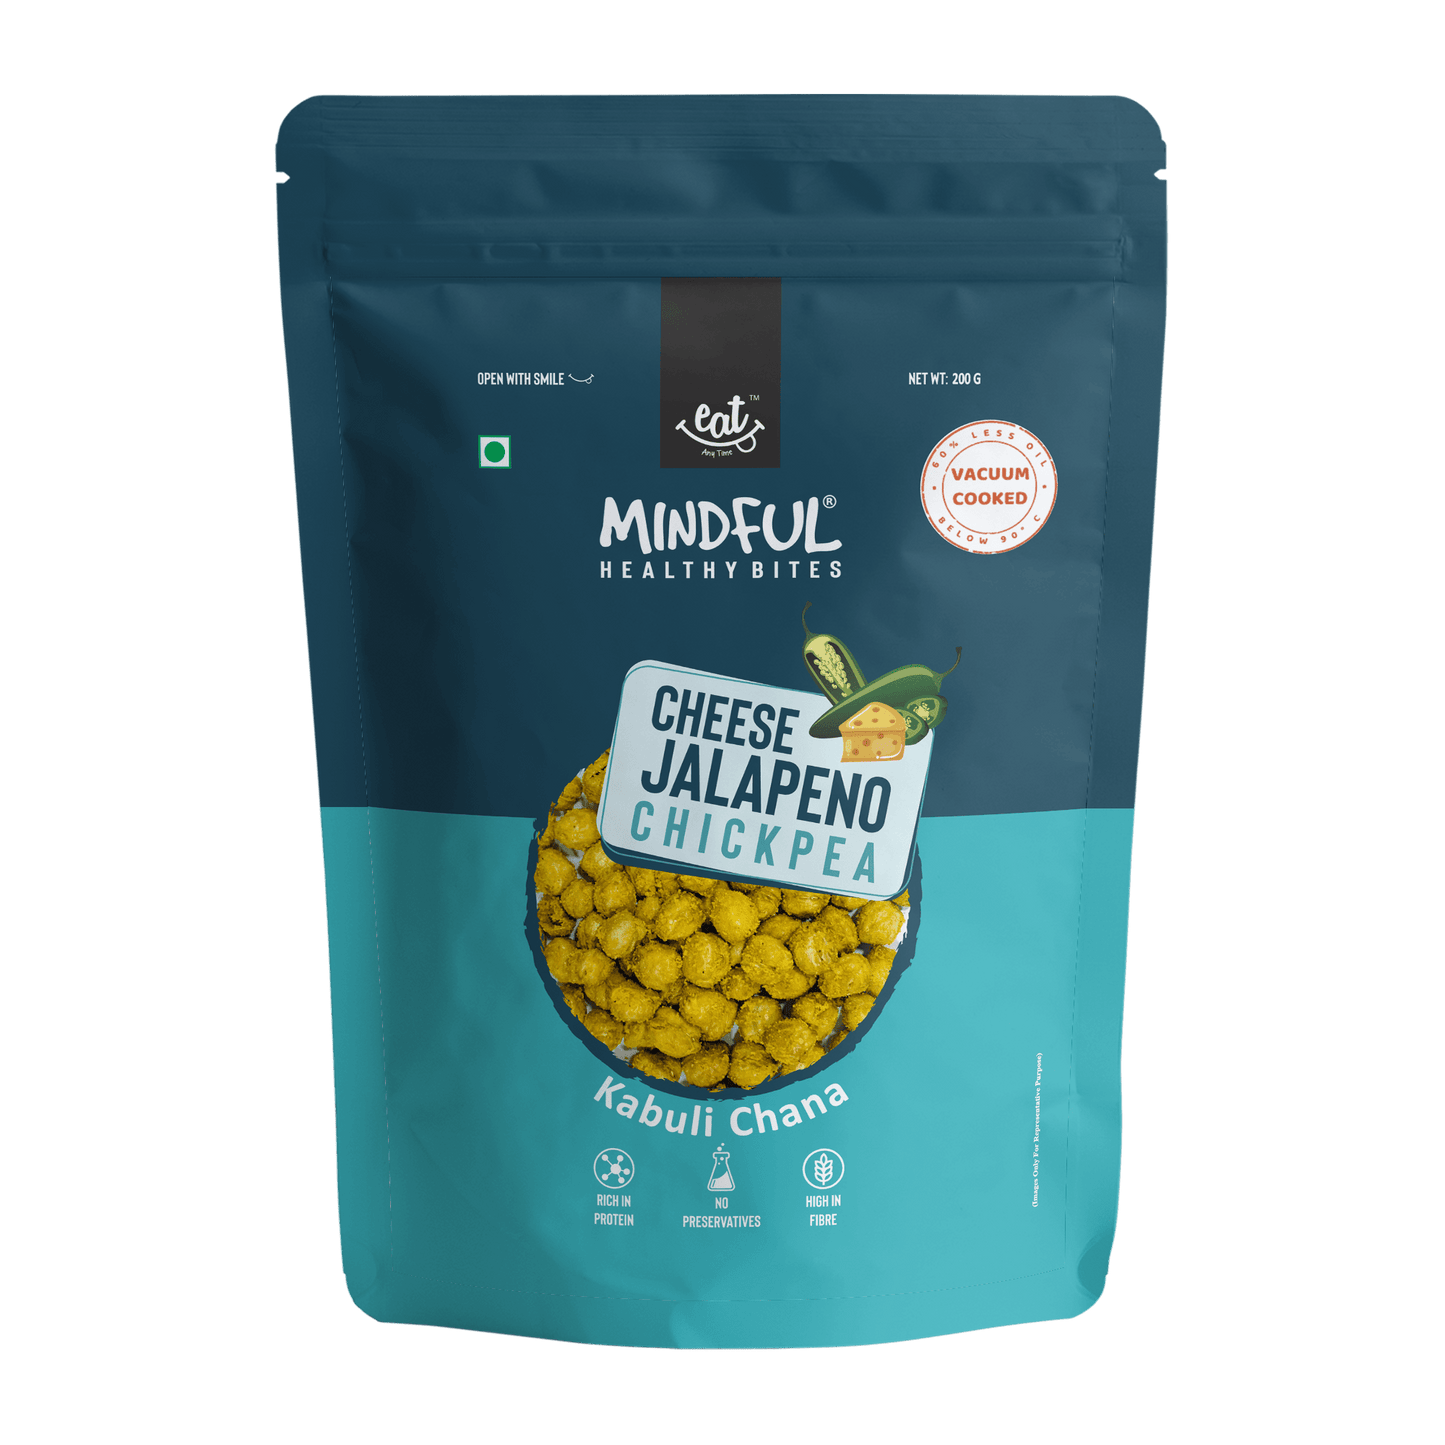 Shop Eat Anytime - Best Price on Cheese Jalapeno Chickpeas